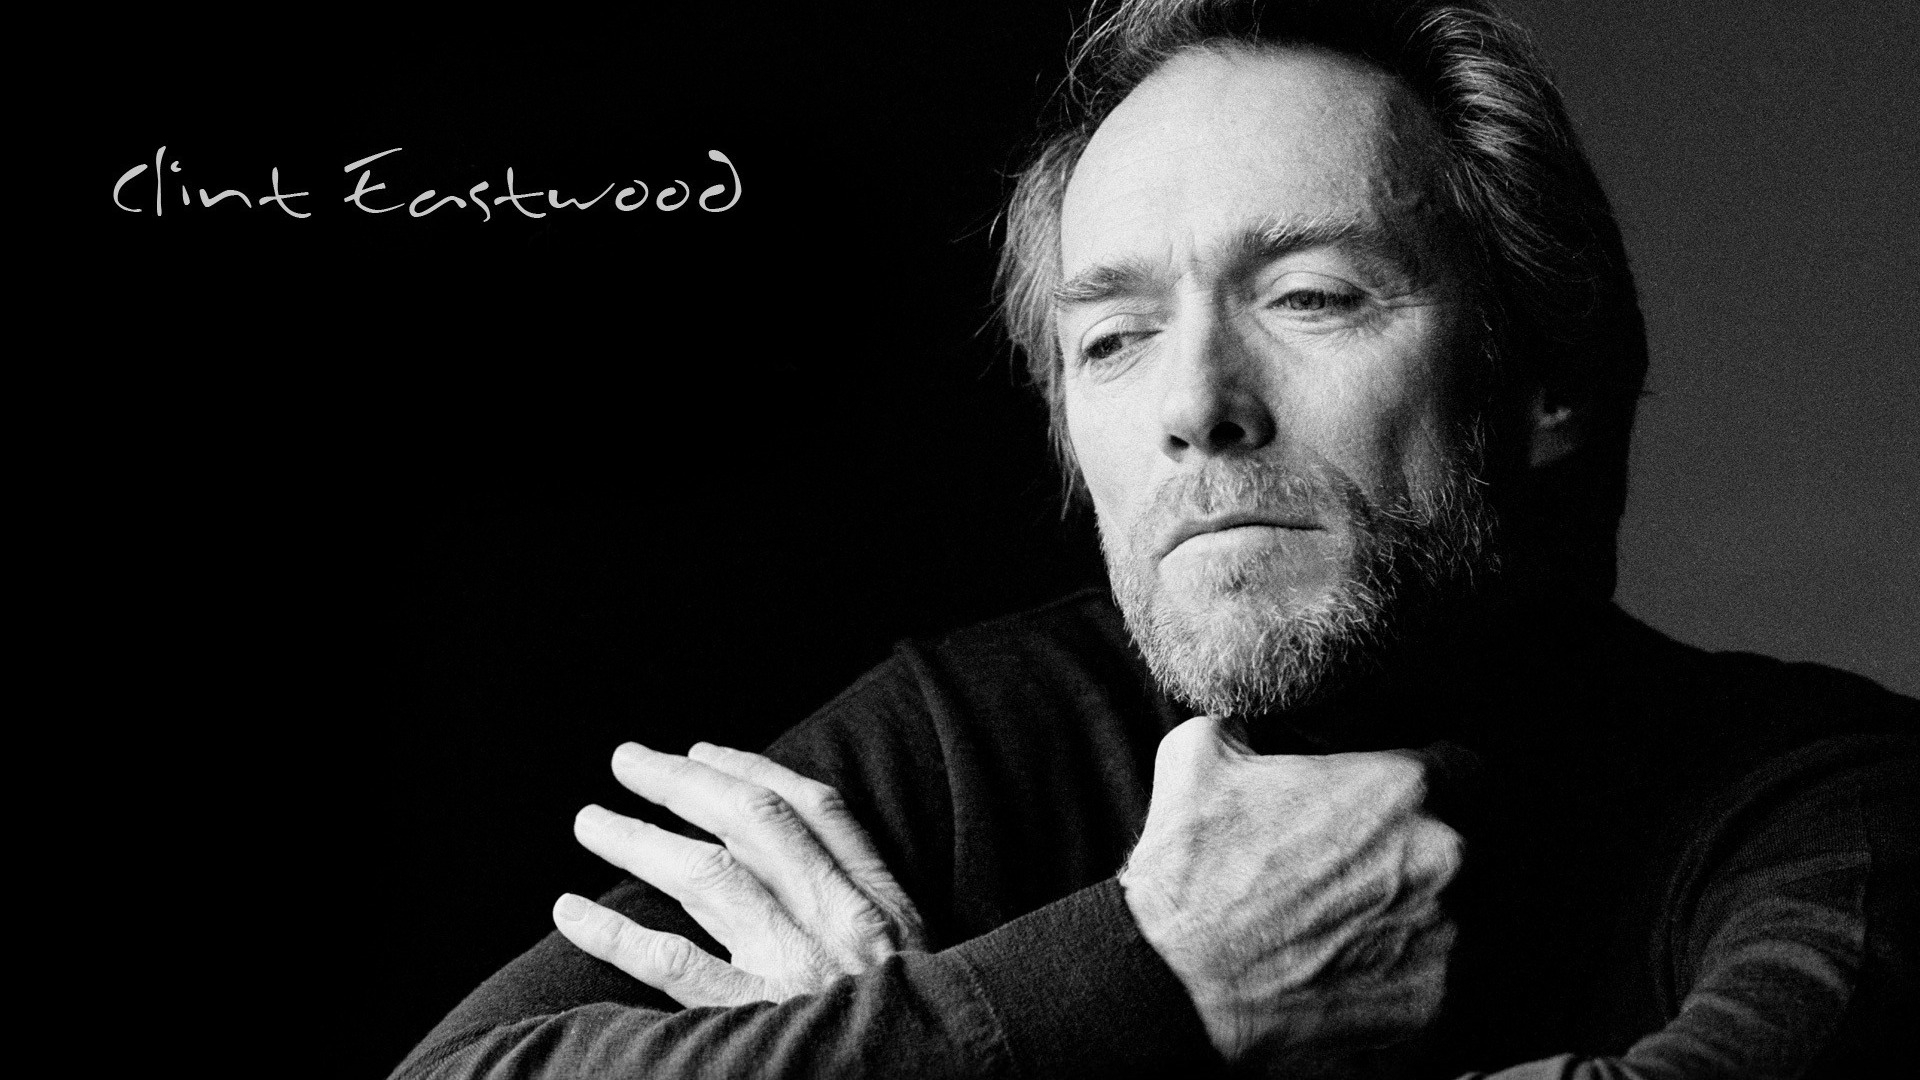 Clint Eastwood Black and White for 1920 x 1080 HDTV 1080p resolution